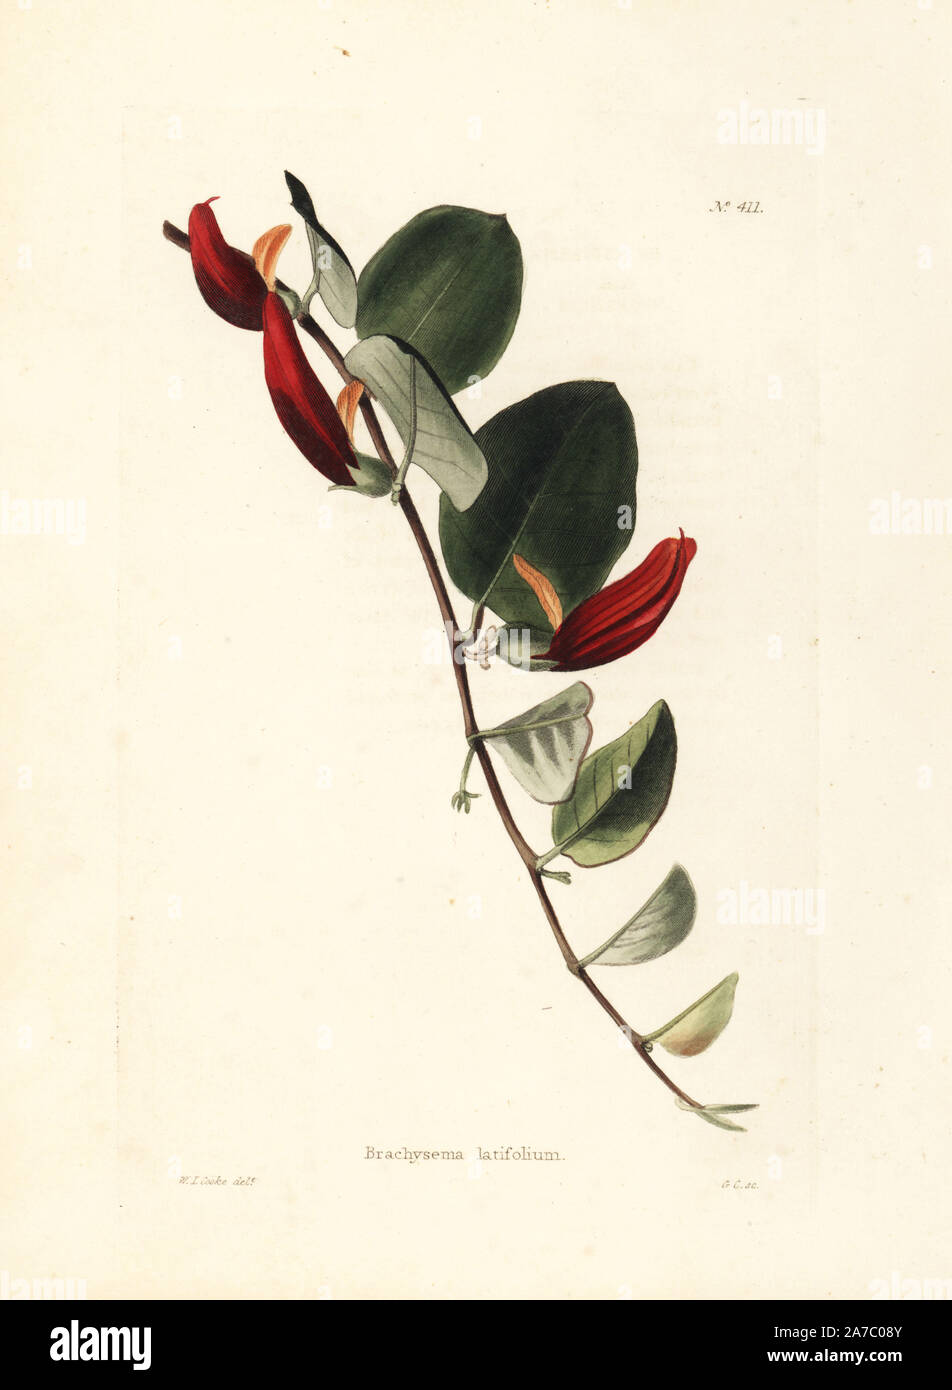 Broad-leaved brachysema, Gastrolobium minus. Handcoloured copperplate engraving by George Cooke from an illustration by W.I. Cooke from Conrad Loddiges' Botanical Cabinet, London, 1810. Stock Photo